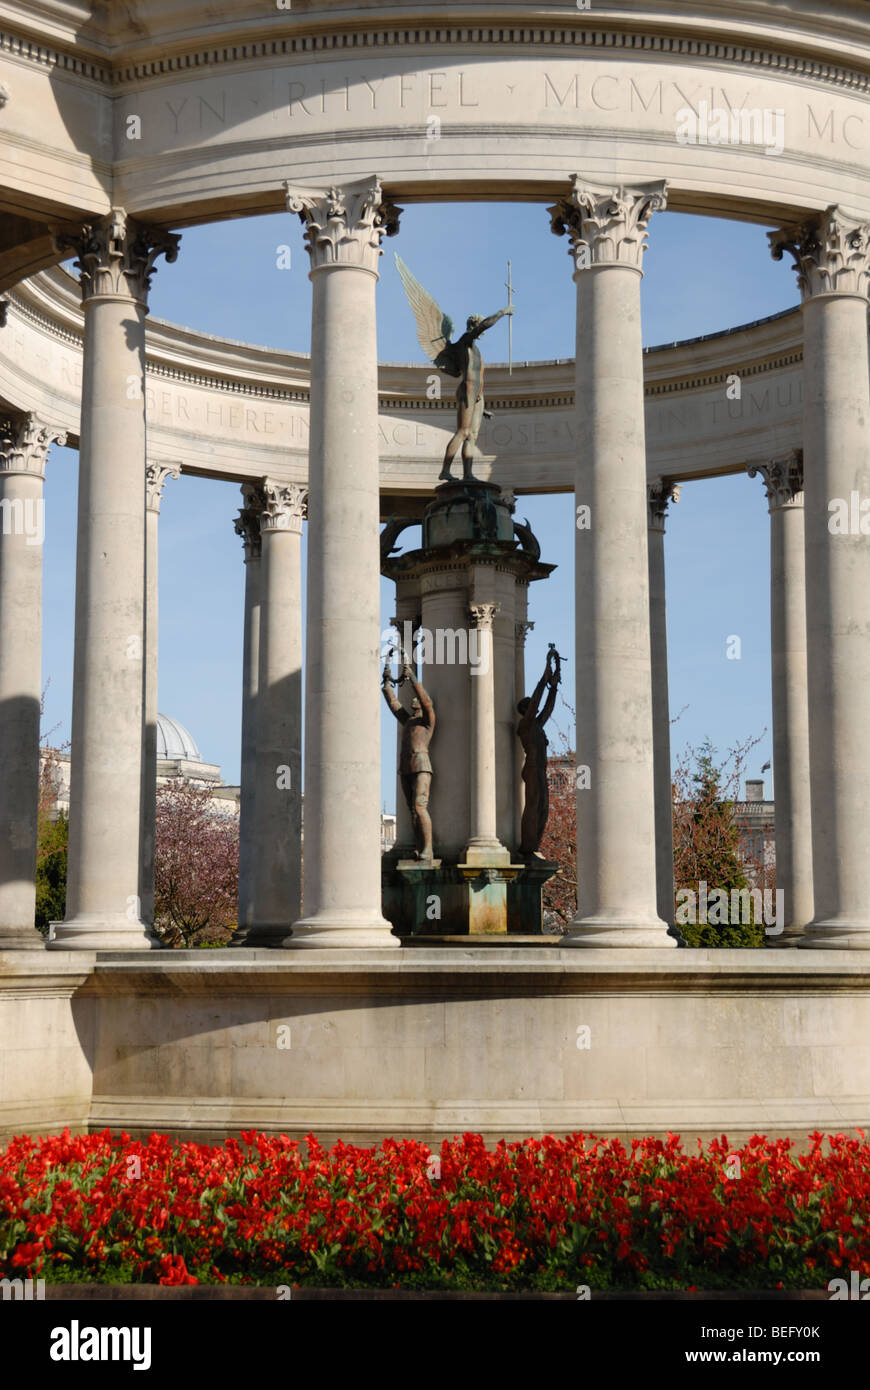 Der Kenotaph in Cardiff Cathays Park Stockfoto